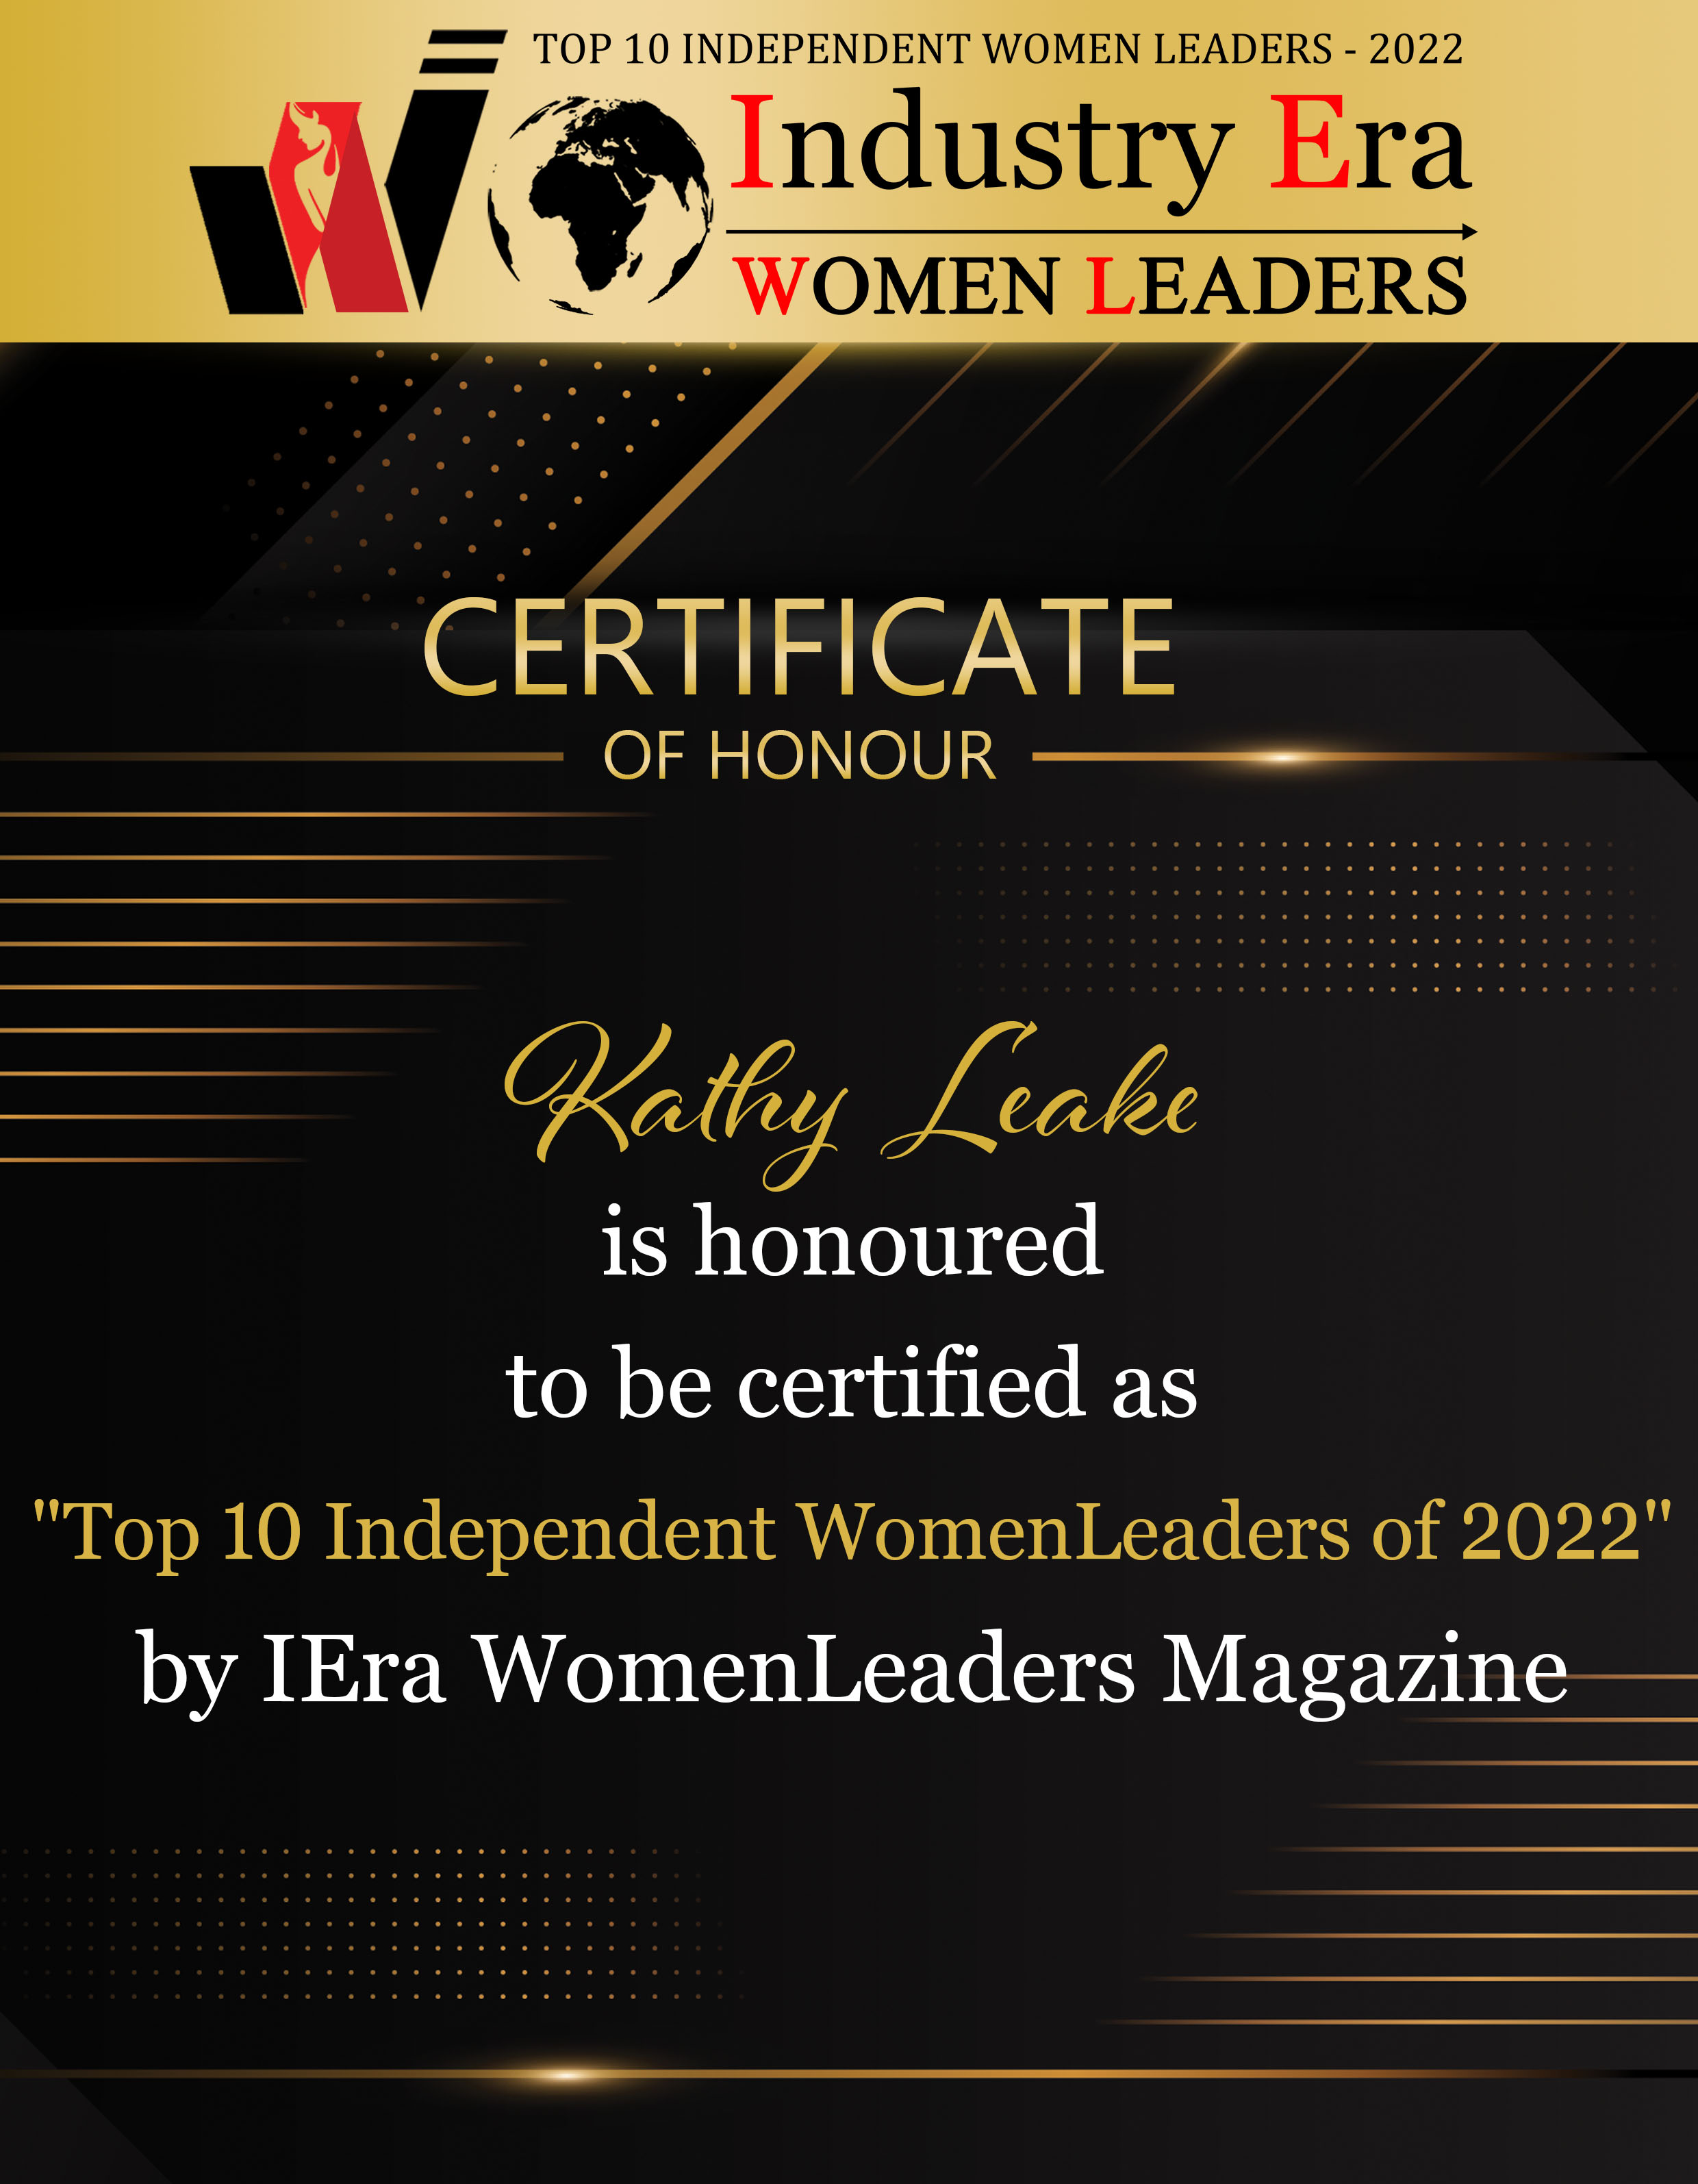 Kathy Leake, Founder & CEO of Crux Intelligence, Top 10 Independent Women Leaders of 2022